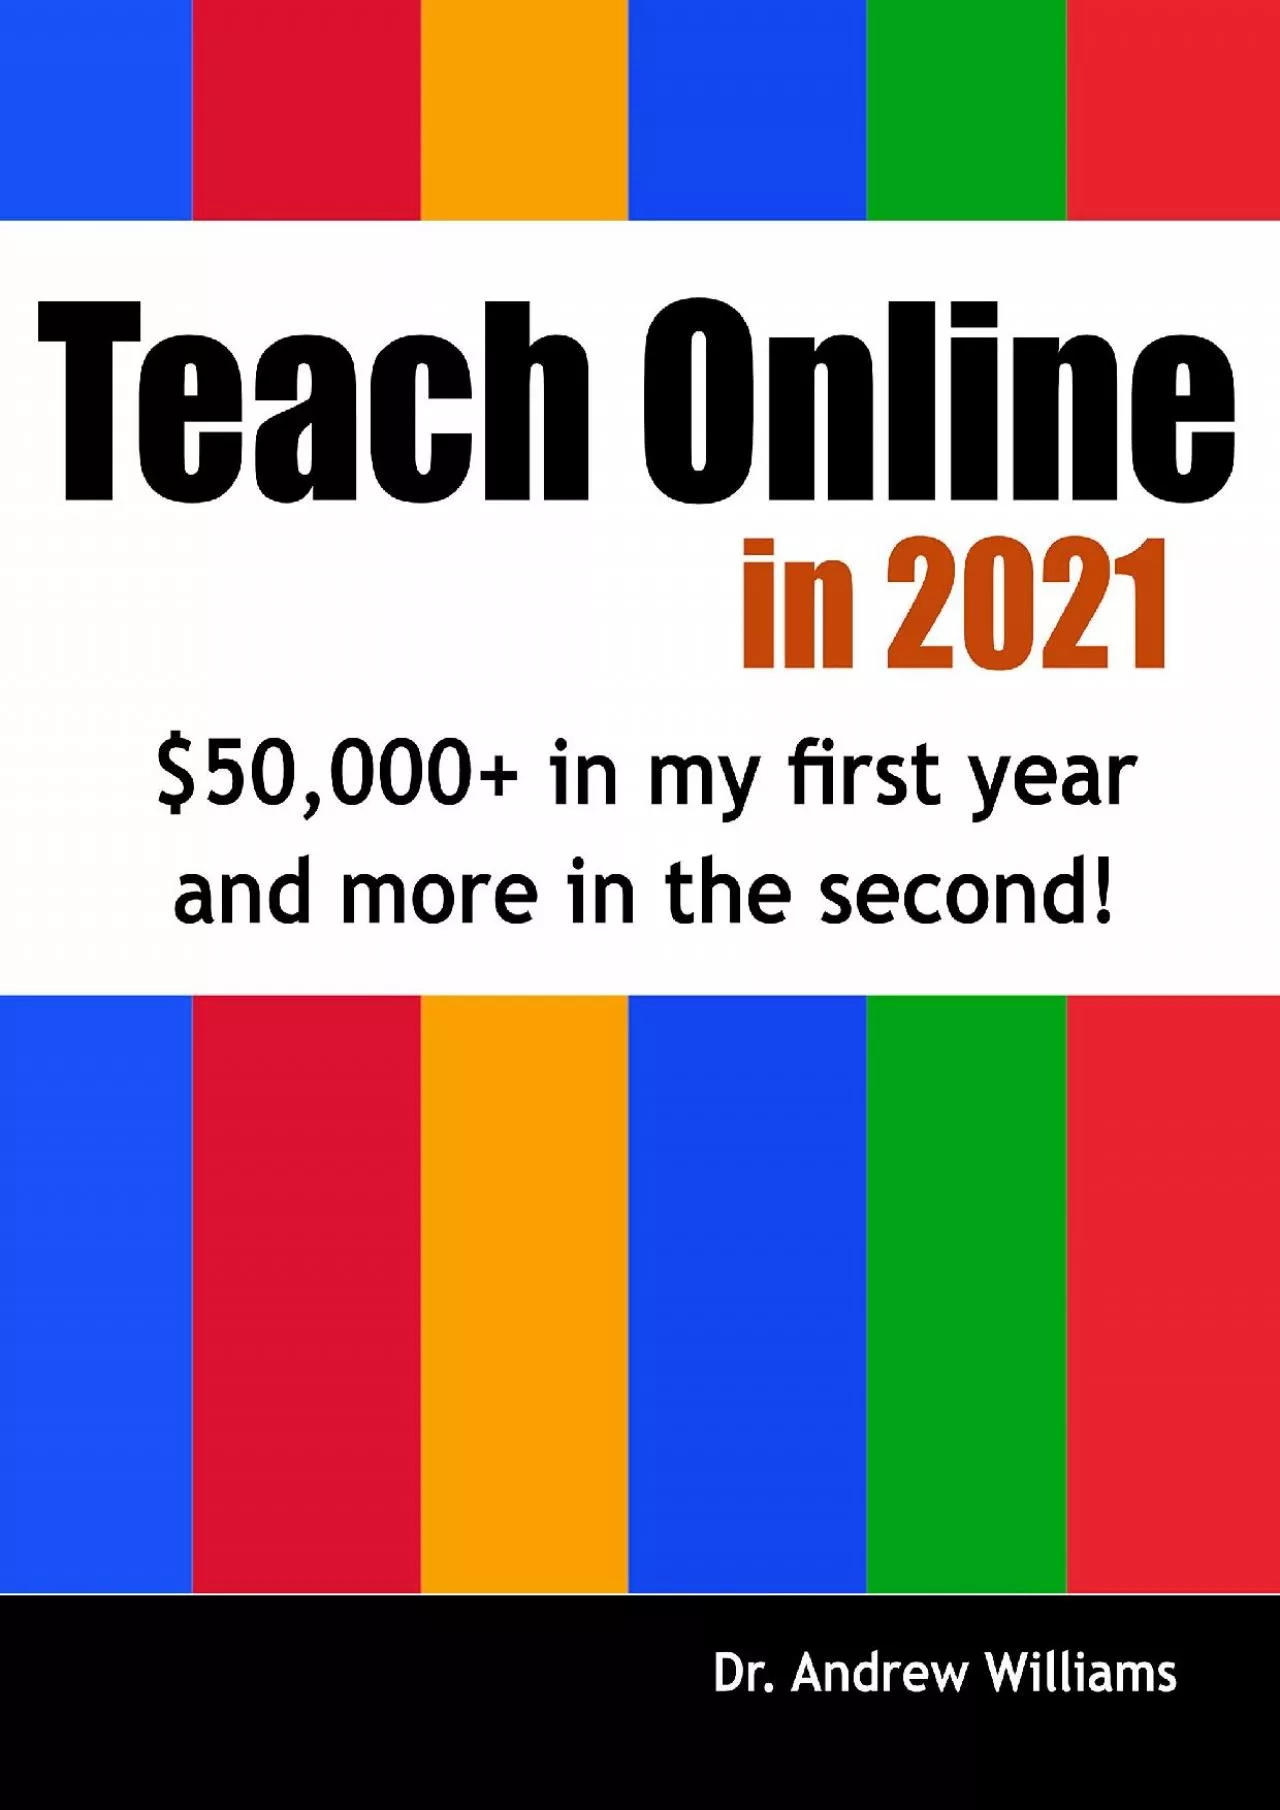 [EBOOK] Teach Online in 2021: 50,000+ in my first year and more in the second Webmaster